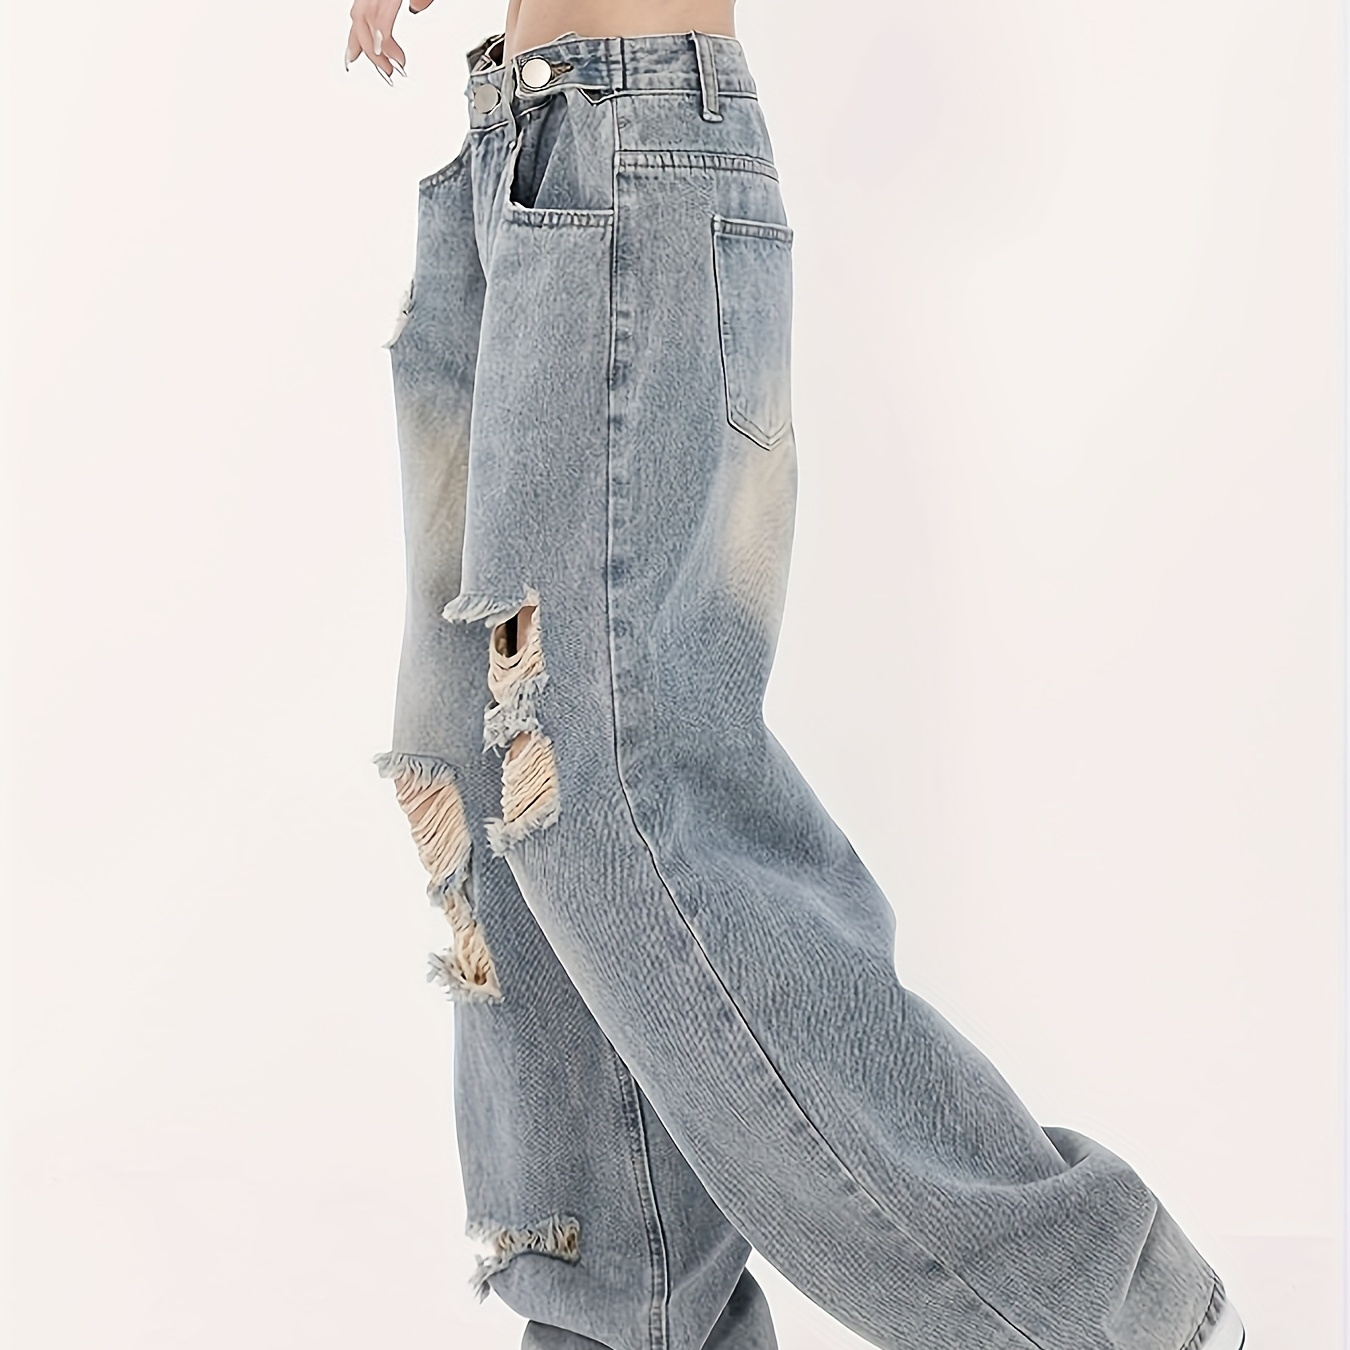 

Blue Ripped Holes Straight Jeans, Loose Fit Washed Distressed Street Style Denim Pants, Women's Denim Jeans & Clothing